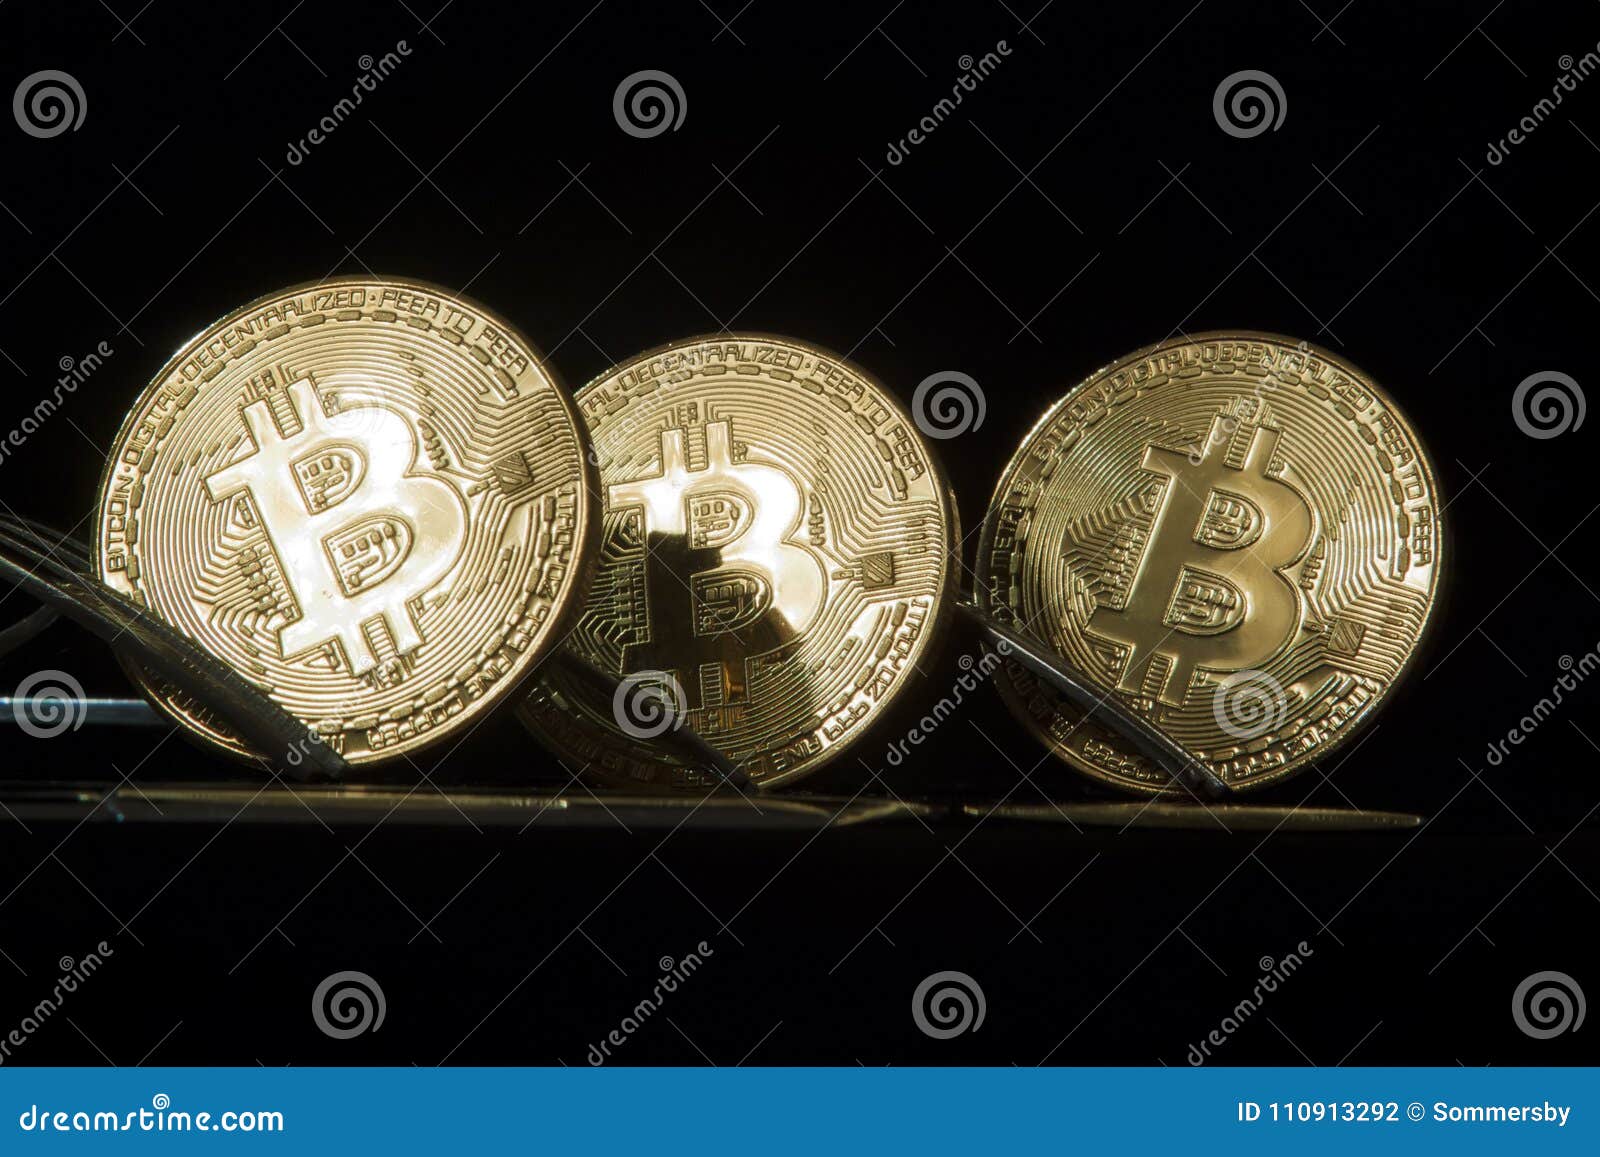 how much are 3 bitcoins worth